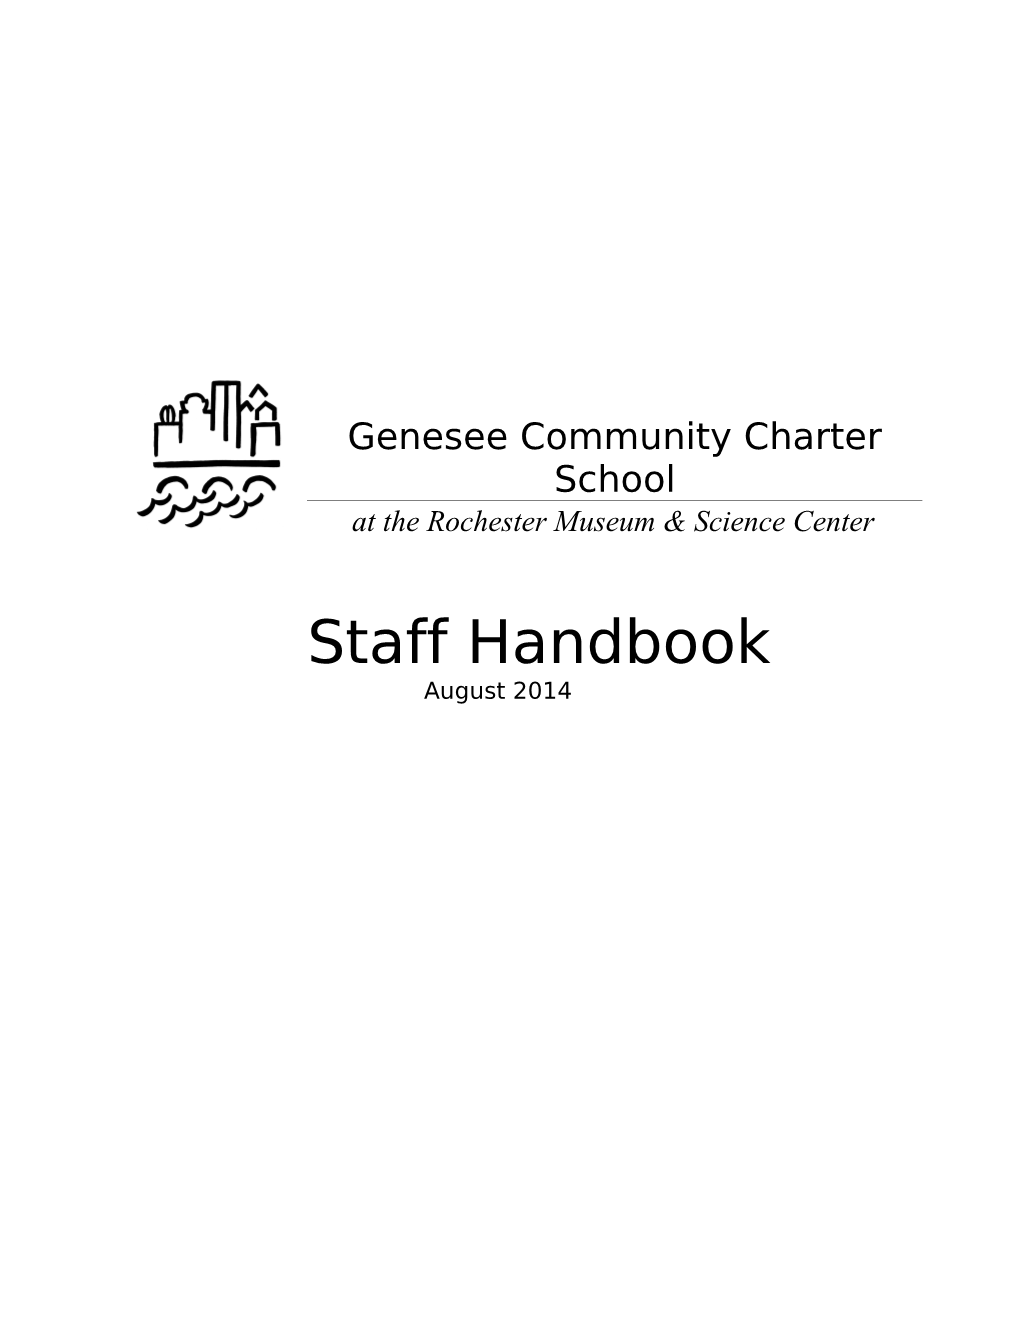 Welcome to the Genesee Community Charter School 5